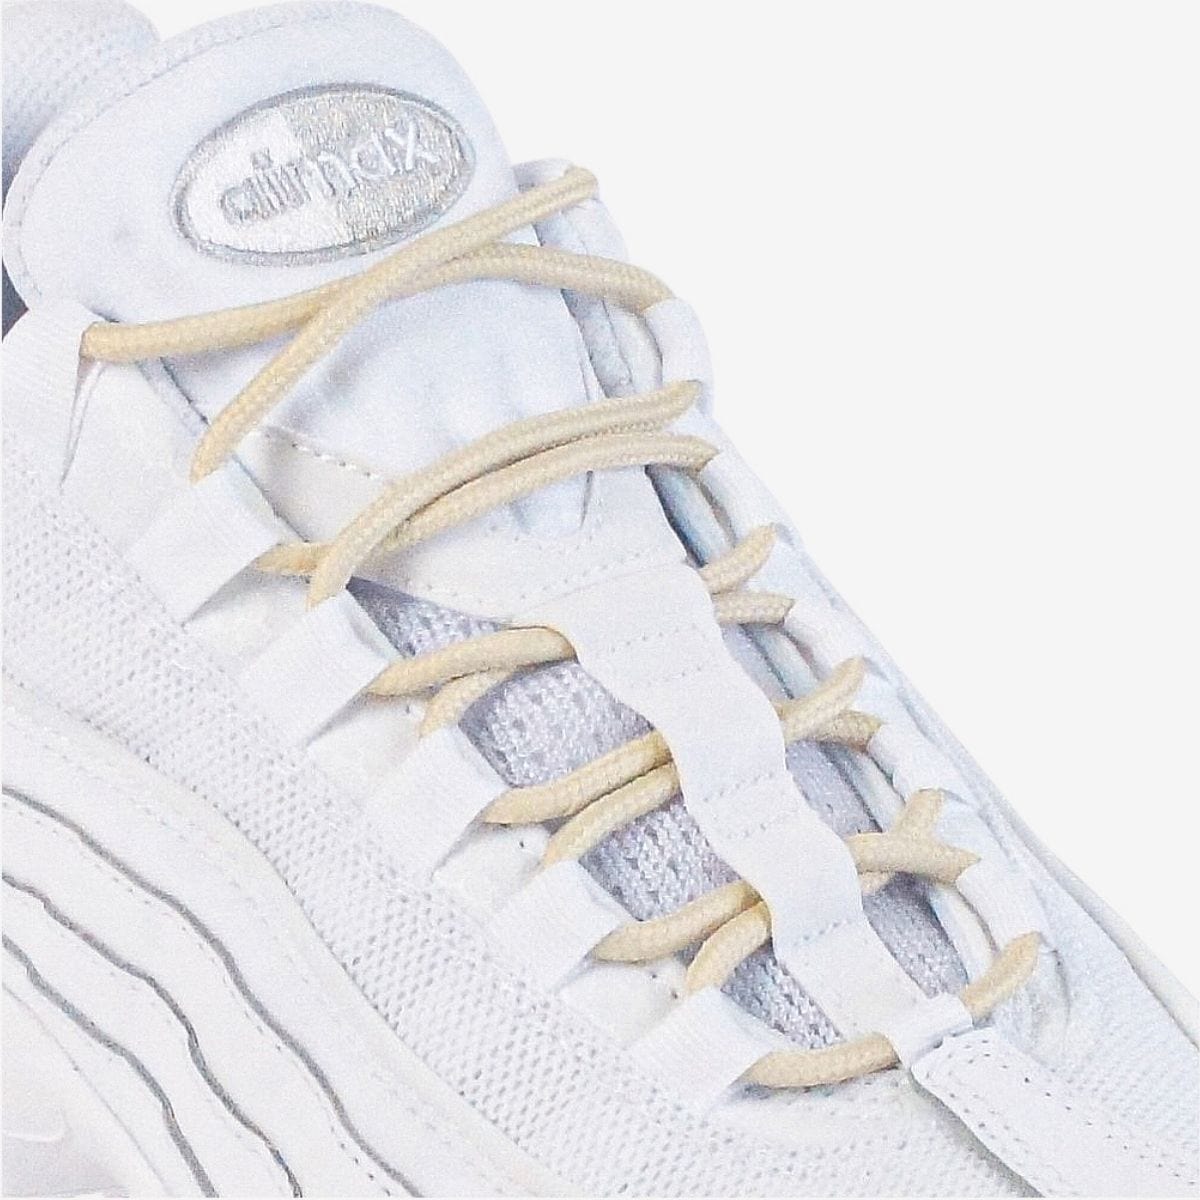 beige-round-rope-shoelaces-for-sneakers-and-running-shoes